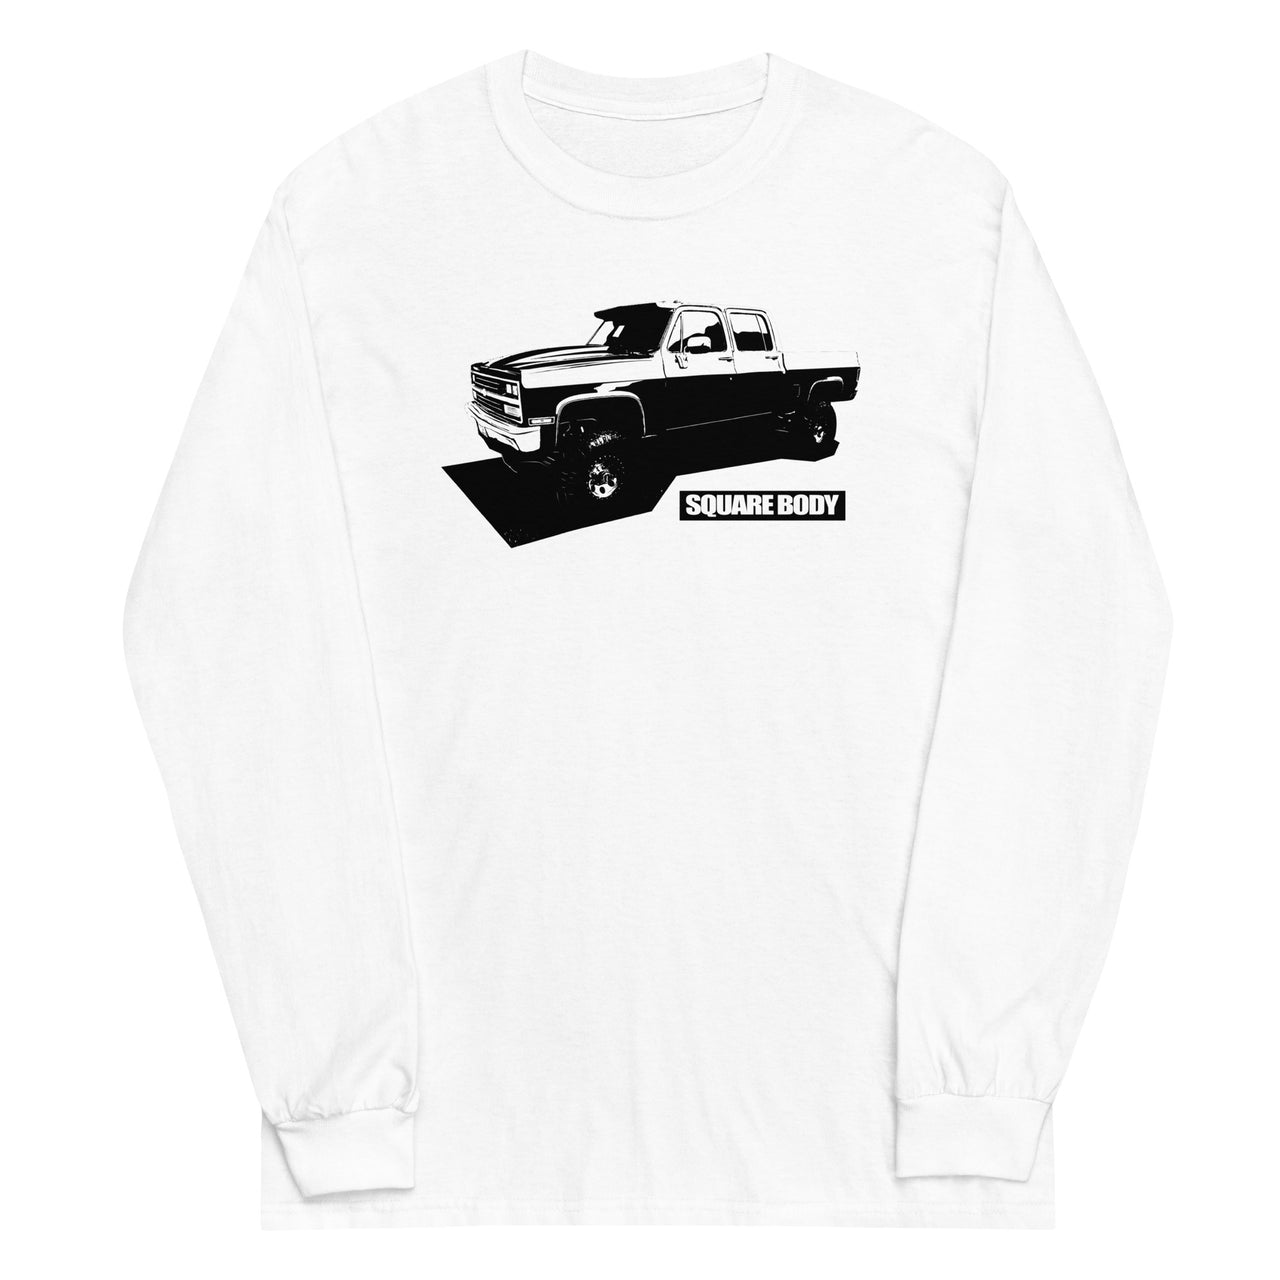 Crew Cab Square Body Truck Long Sleeve Shirt in White